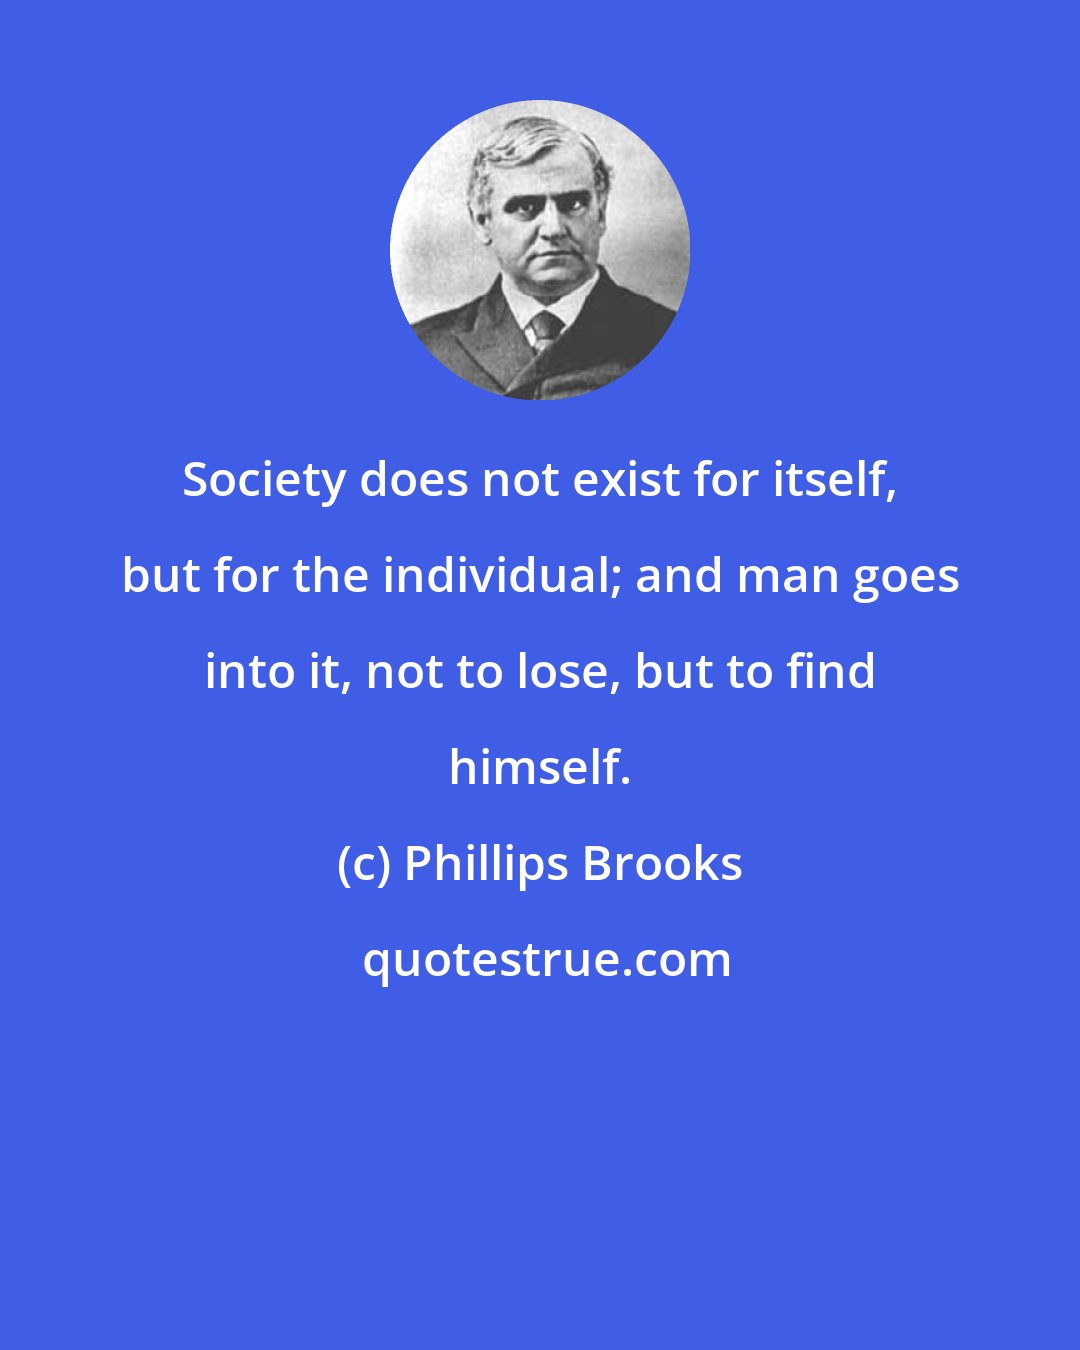 Phillips Brooks: Society does not exist for itself, but for the individual; and man goes into it, not to lose, but to find himself.